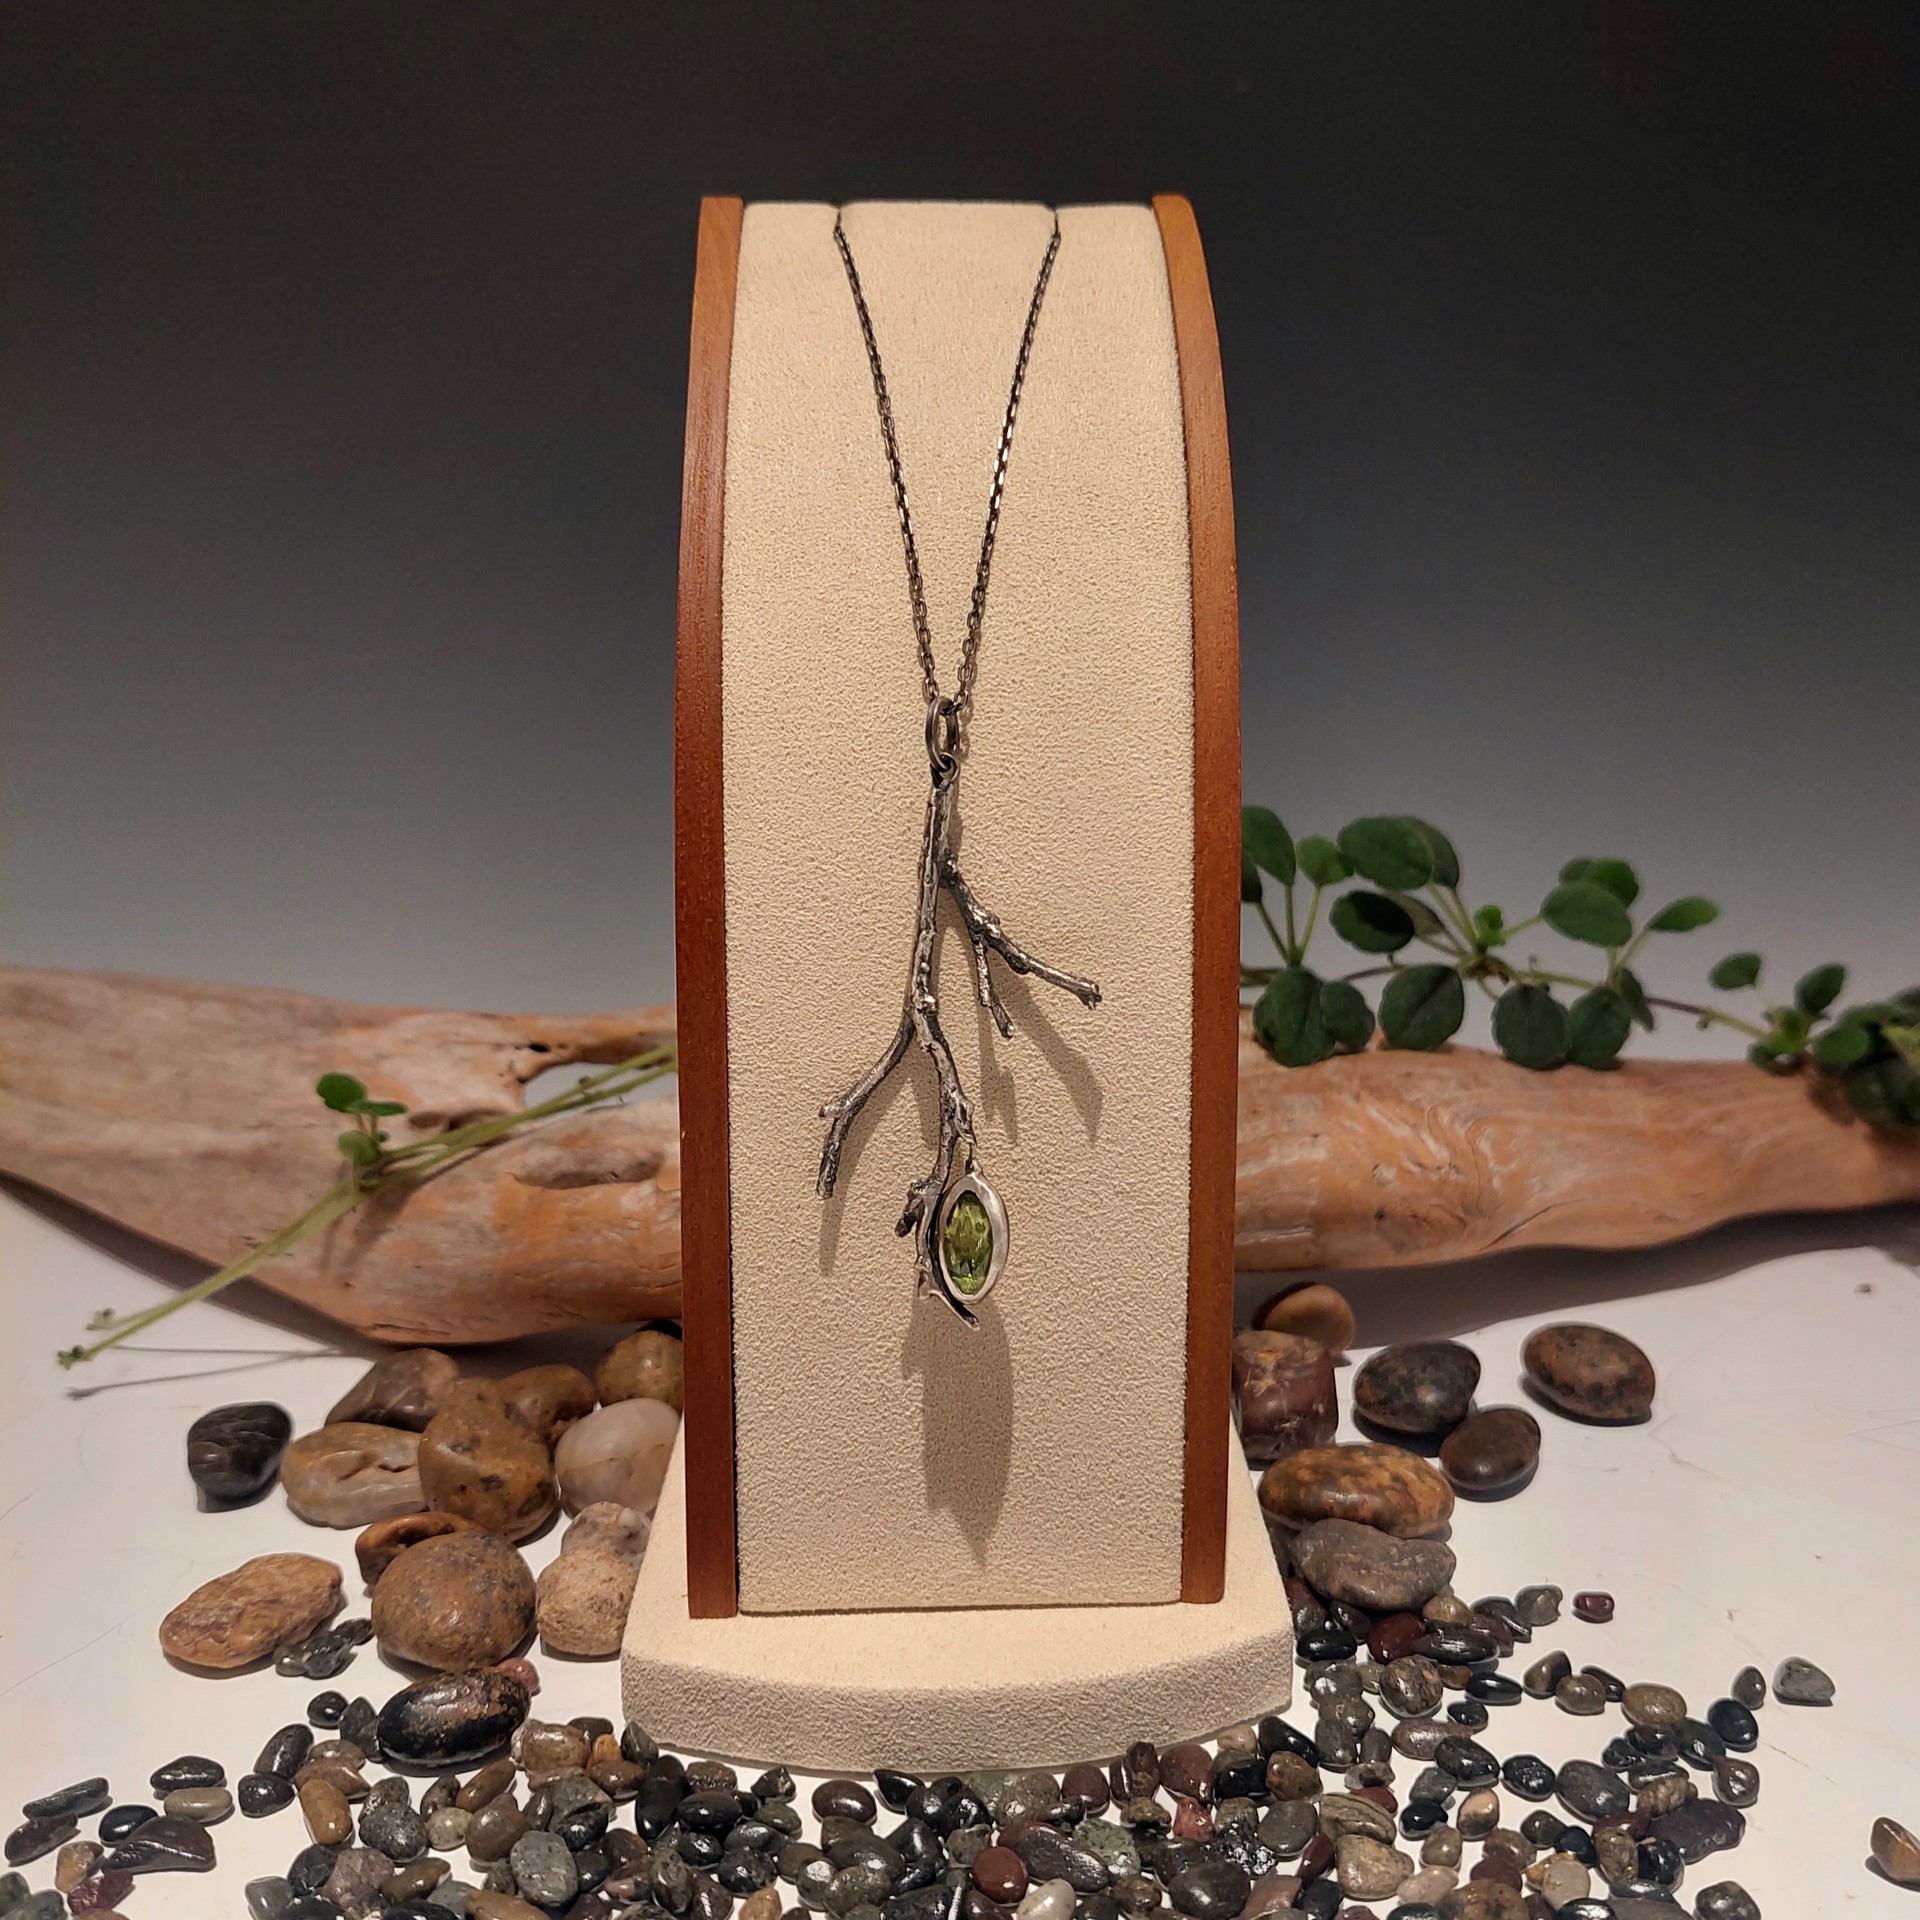 Twig and Peridot Necklace by April Ottey